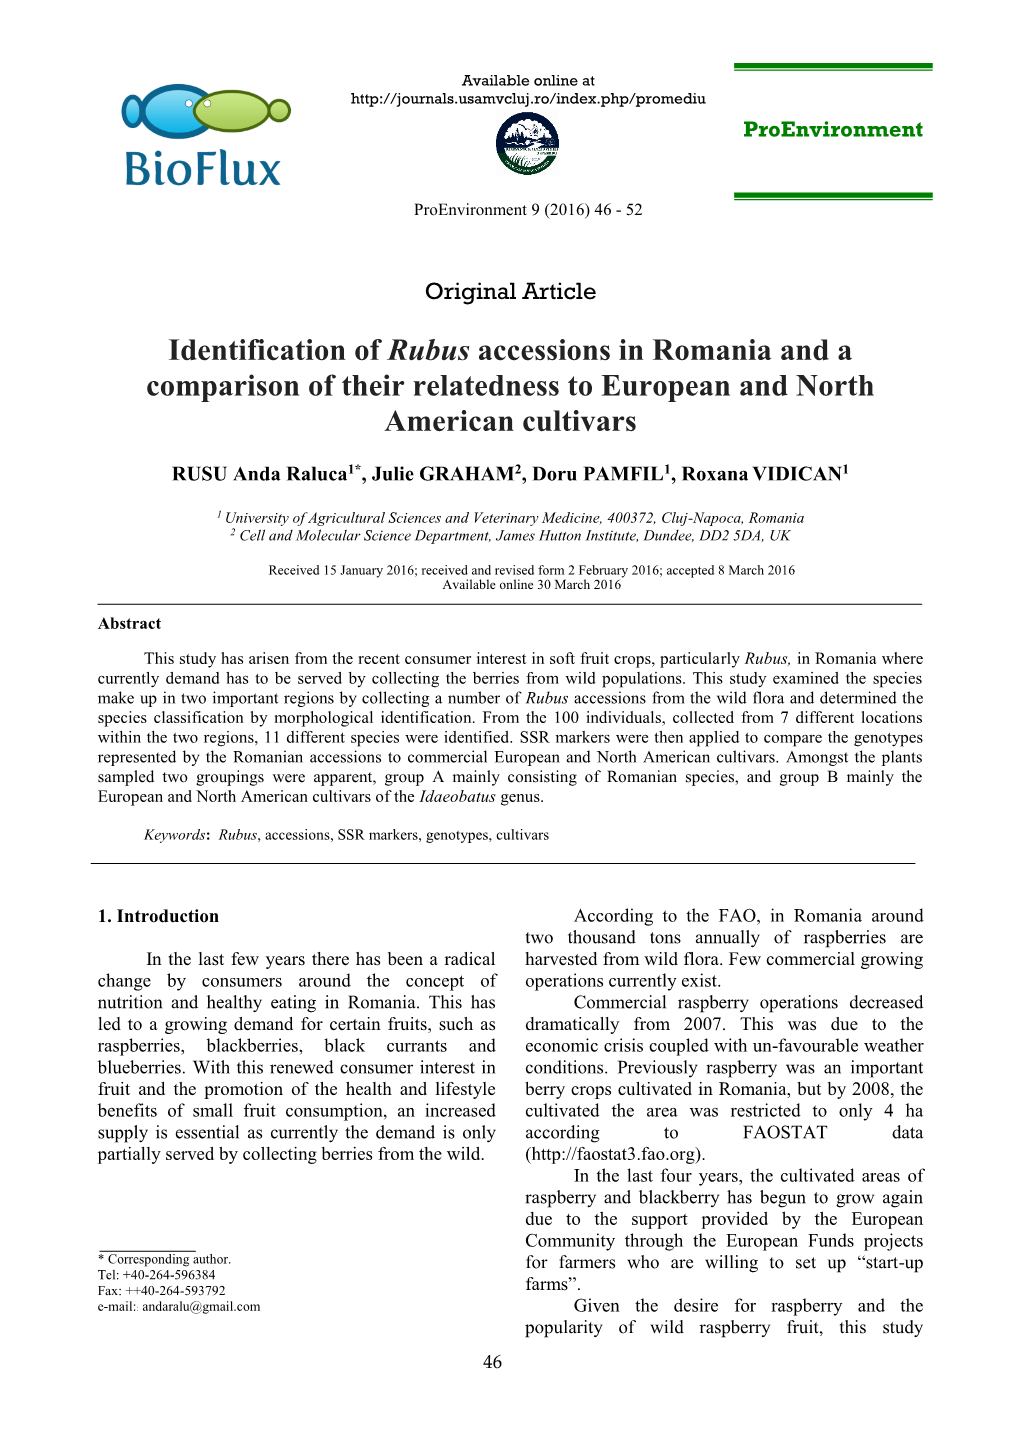 Identification of Rubus Accessions in Romania and a Comparison of Their Relatedness to European and North American Cultivars